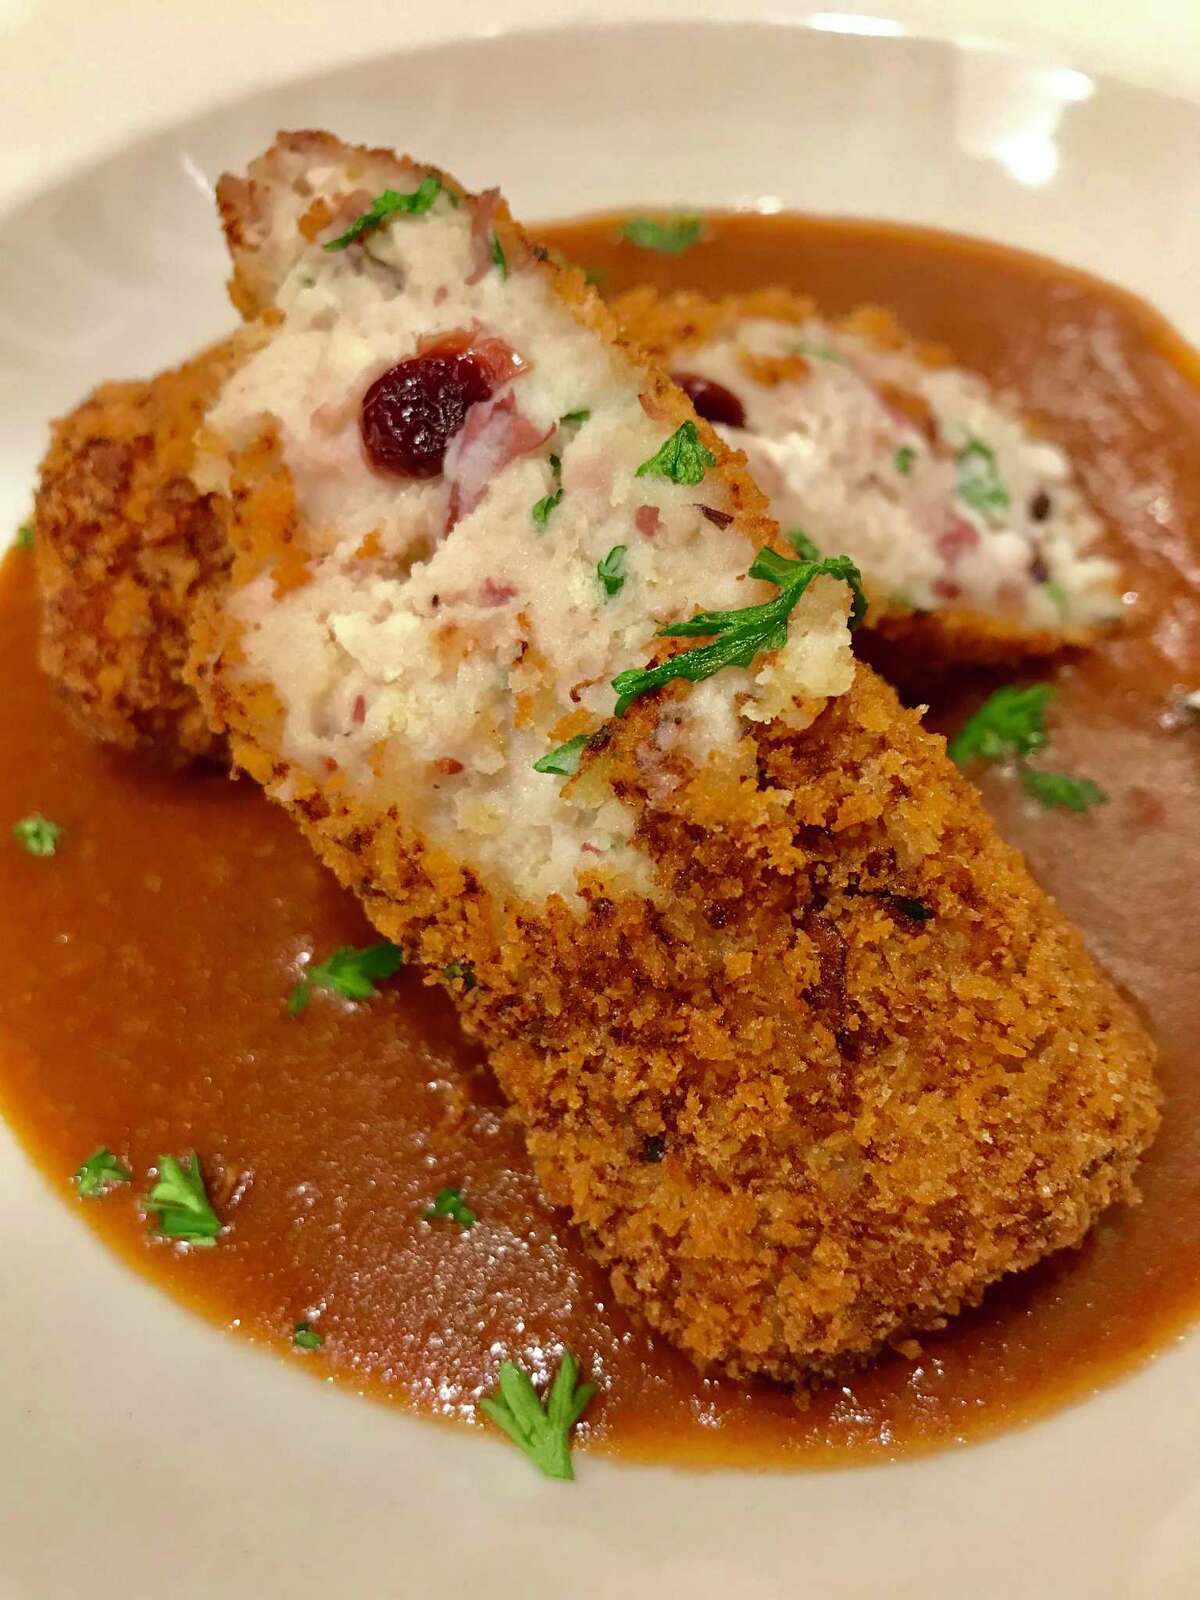 Leftover turkey, mashed potatoes and cranberries are turned into croquettes bathed with leftover gravy.